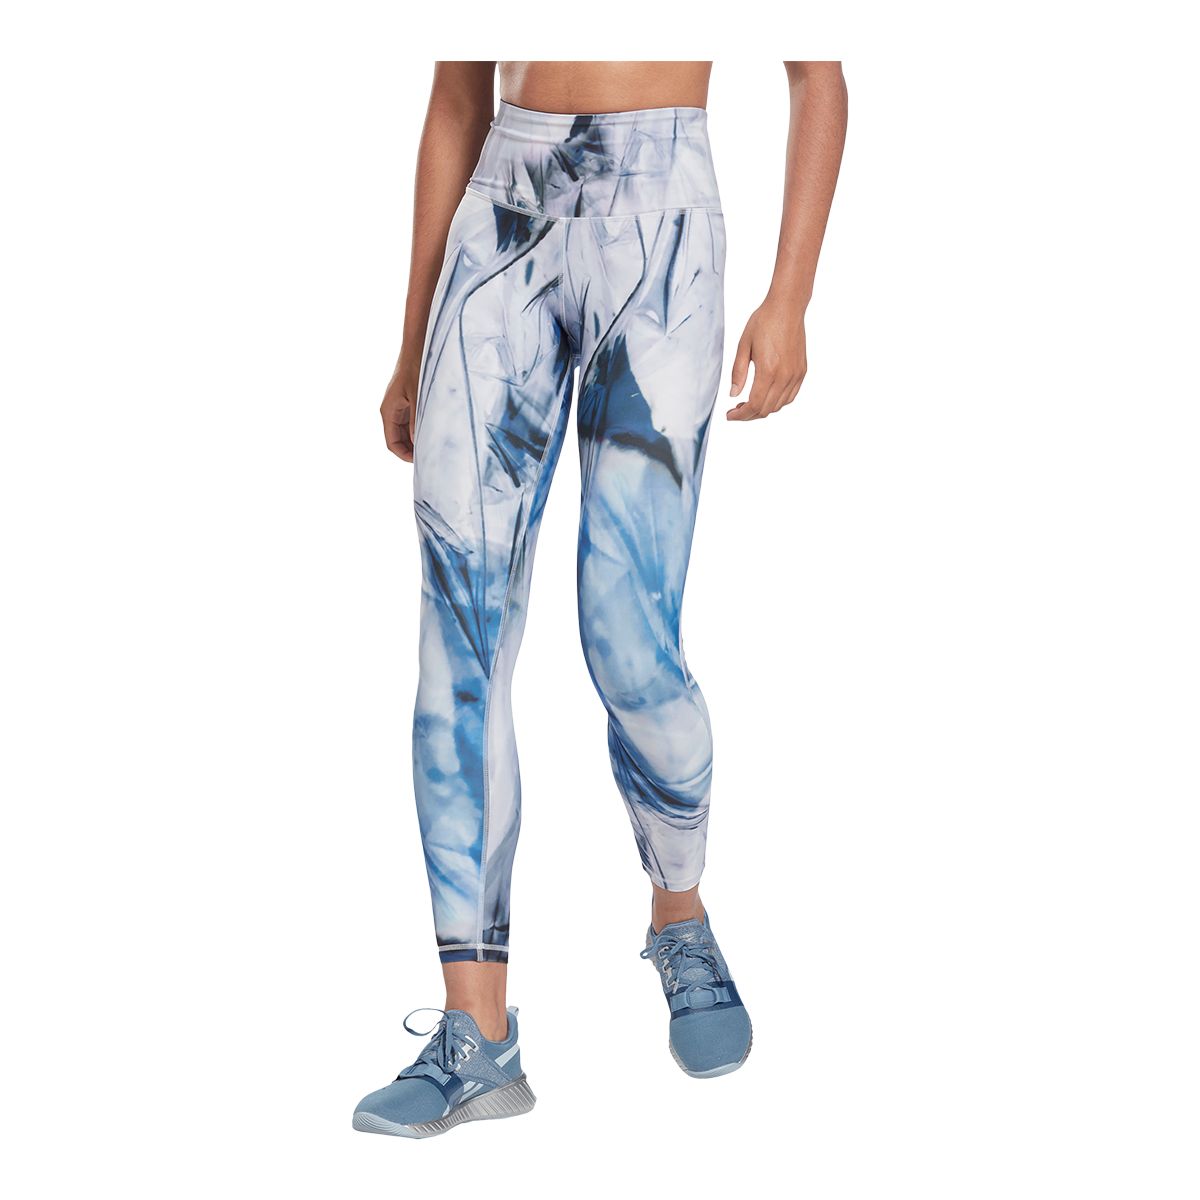 Reebok Women's Studio Lux All Over Print High Rise Tights